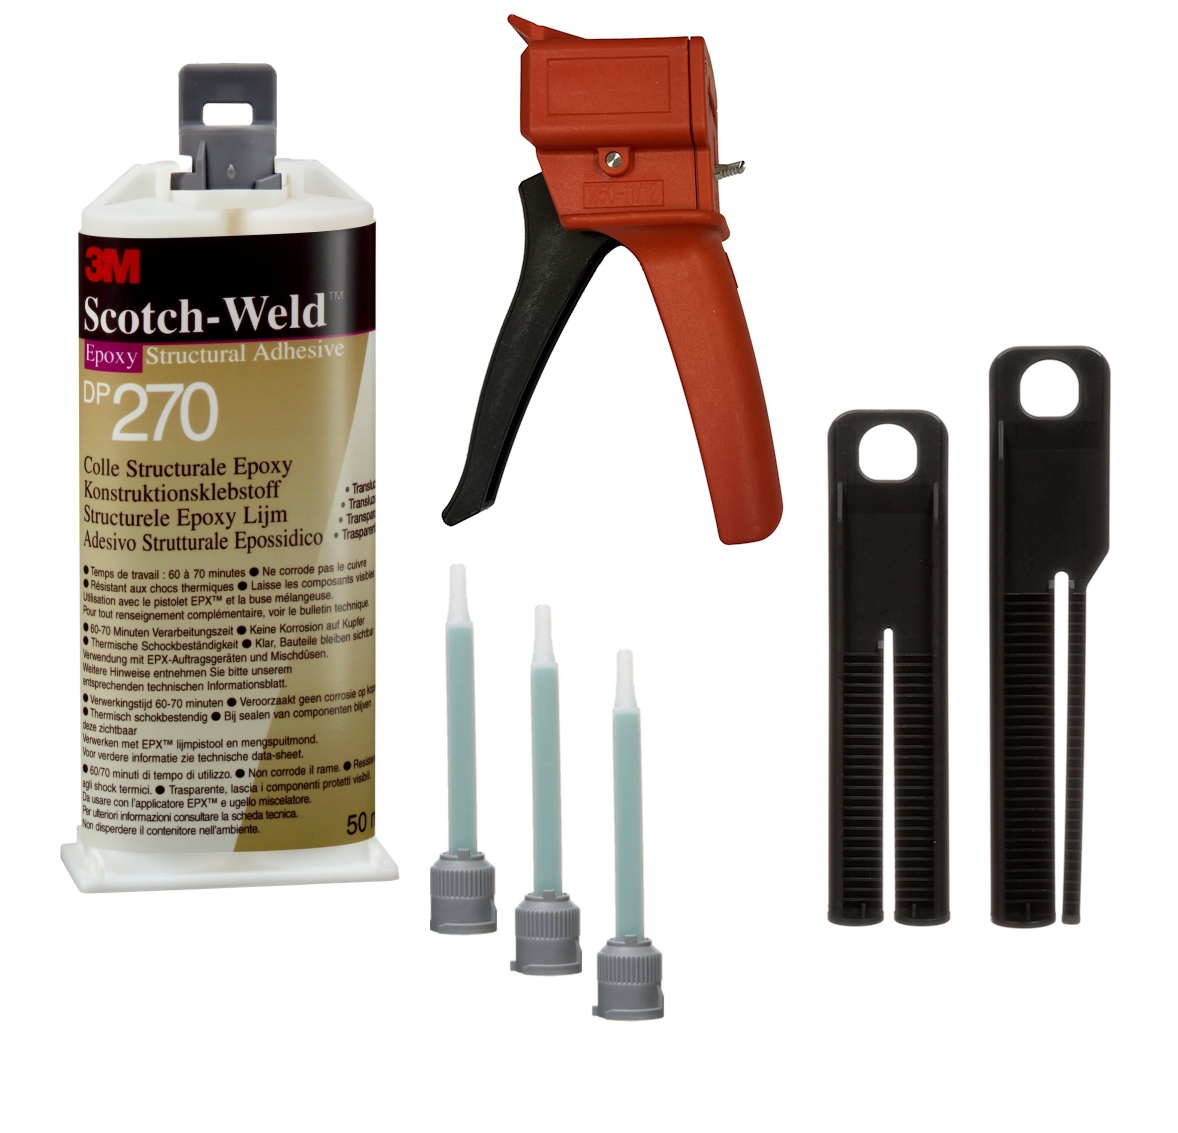 Starter set: 1x 3M Scotch-Weld 2-component construction adhesive EPX DP270, transparent, 48.5 ml, 1x S-K-S hand tool for EPX 38 to 50 ml cartridges incl. feed piston 2:1